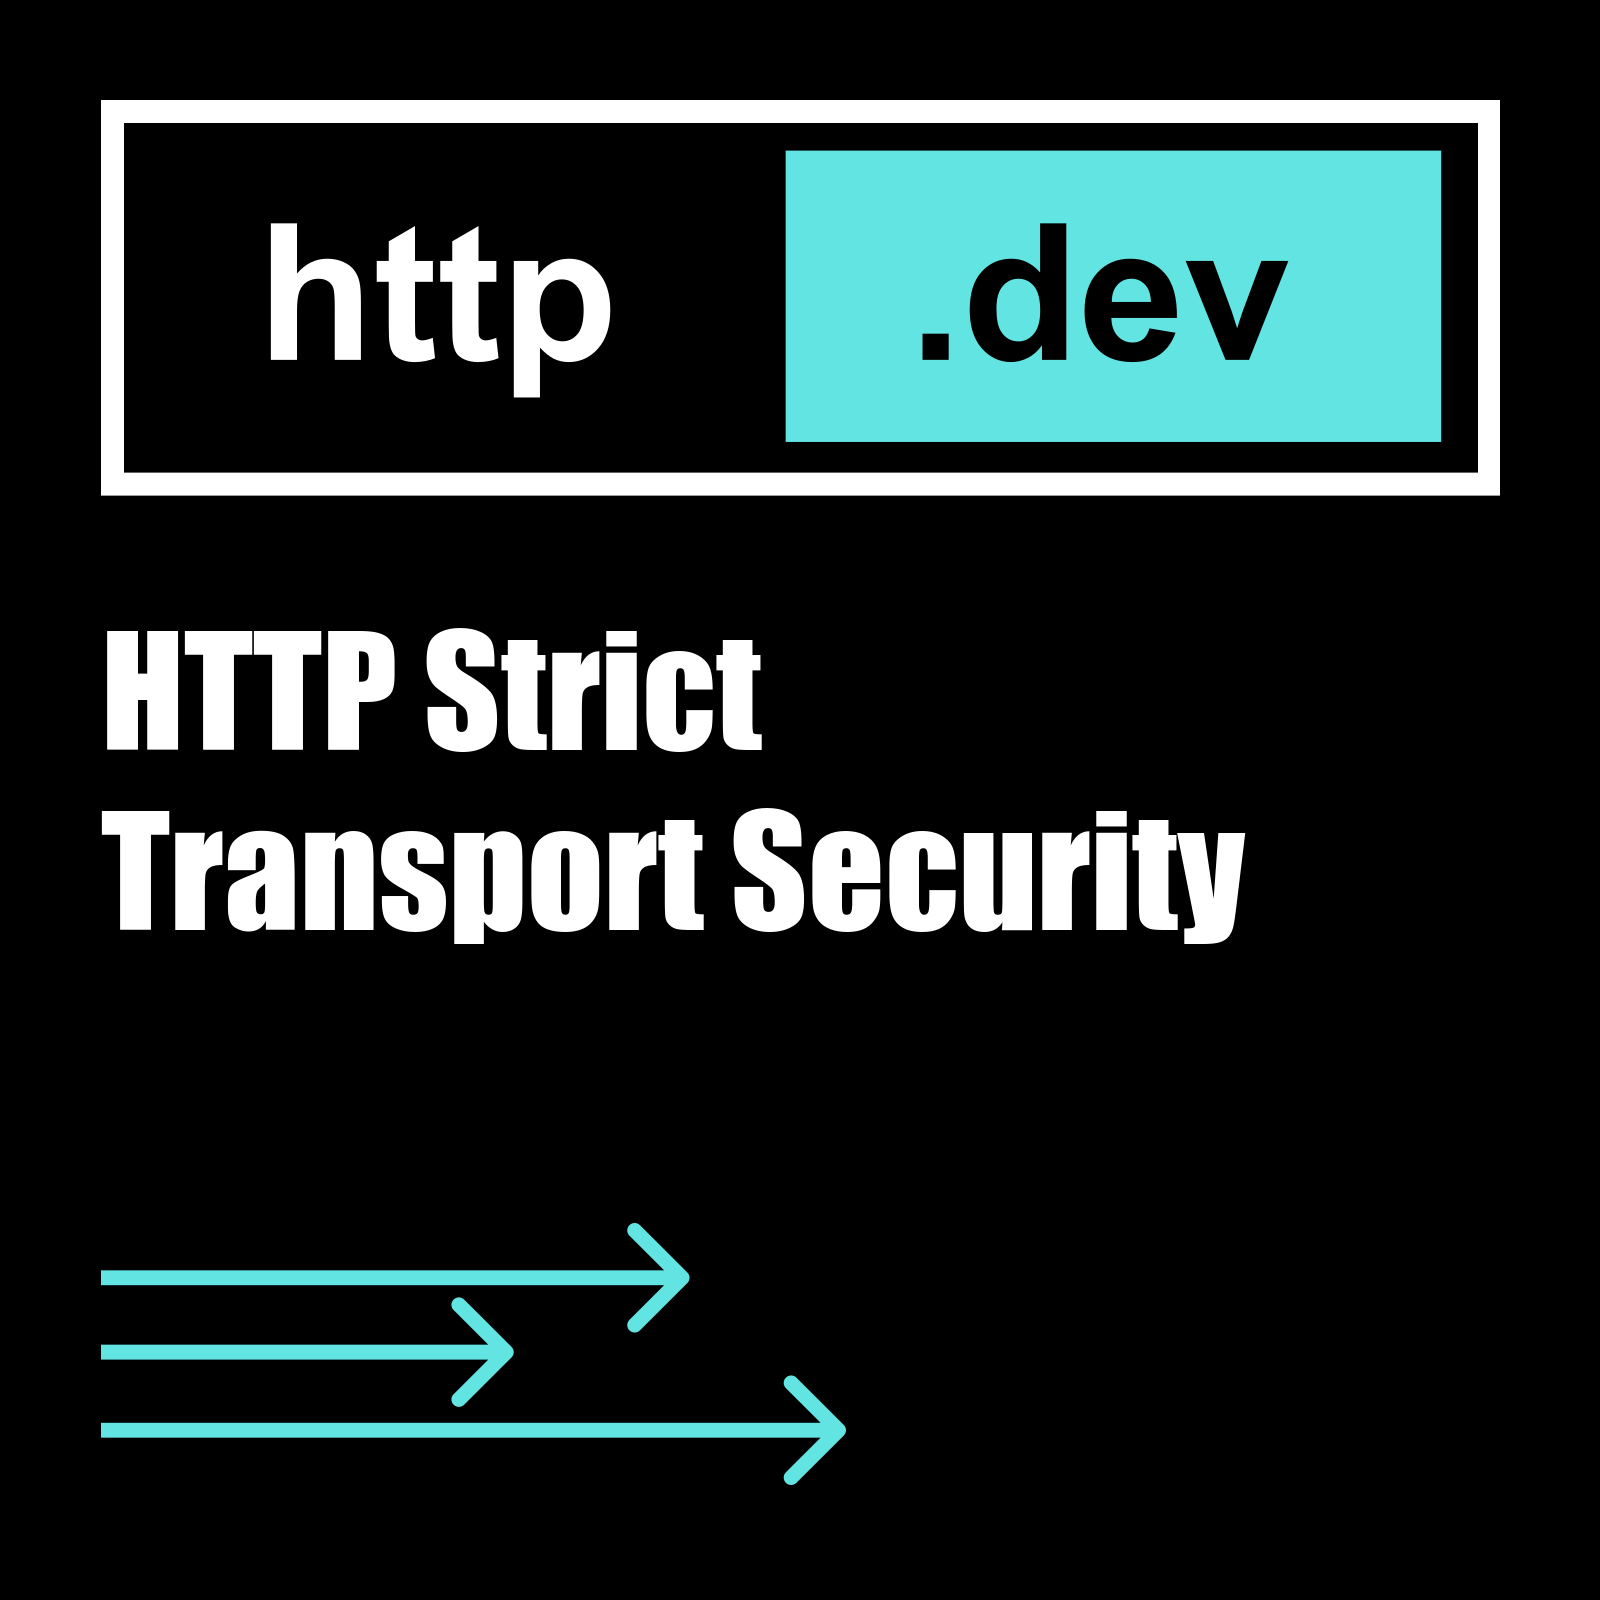 Http Strict Transport Security Explained